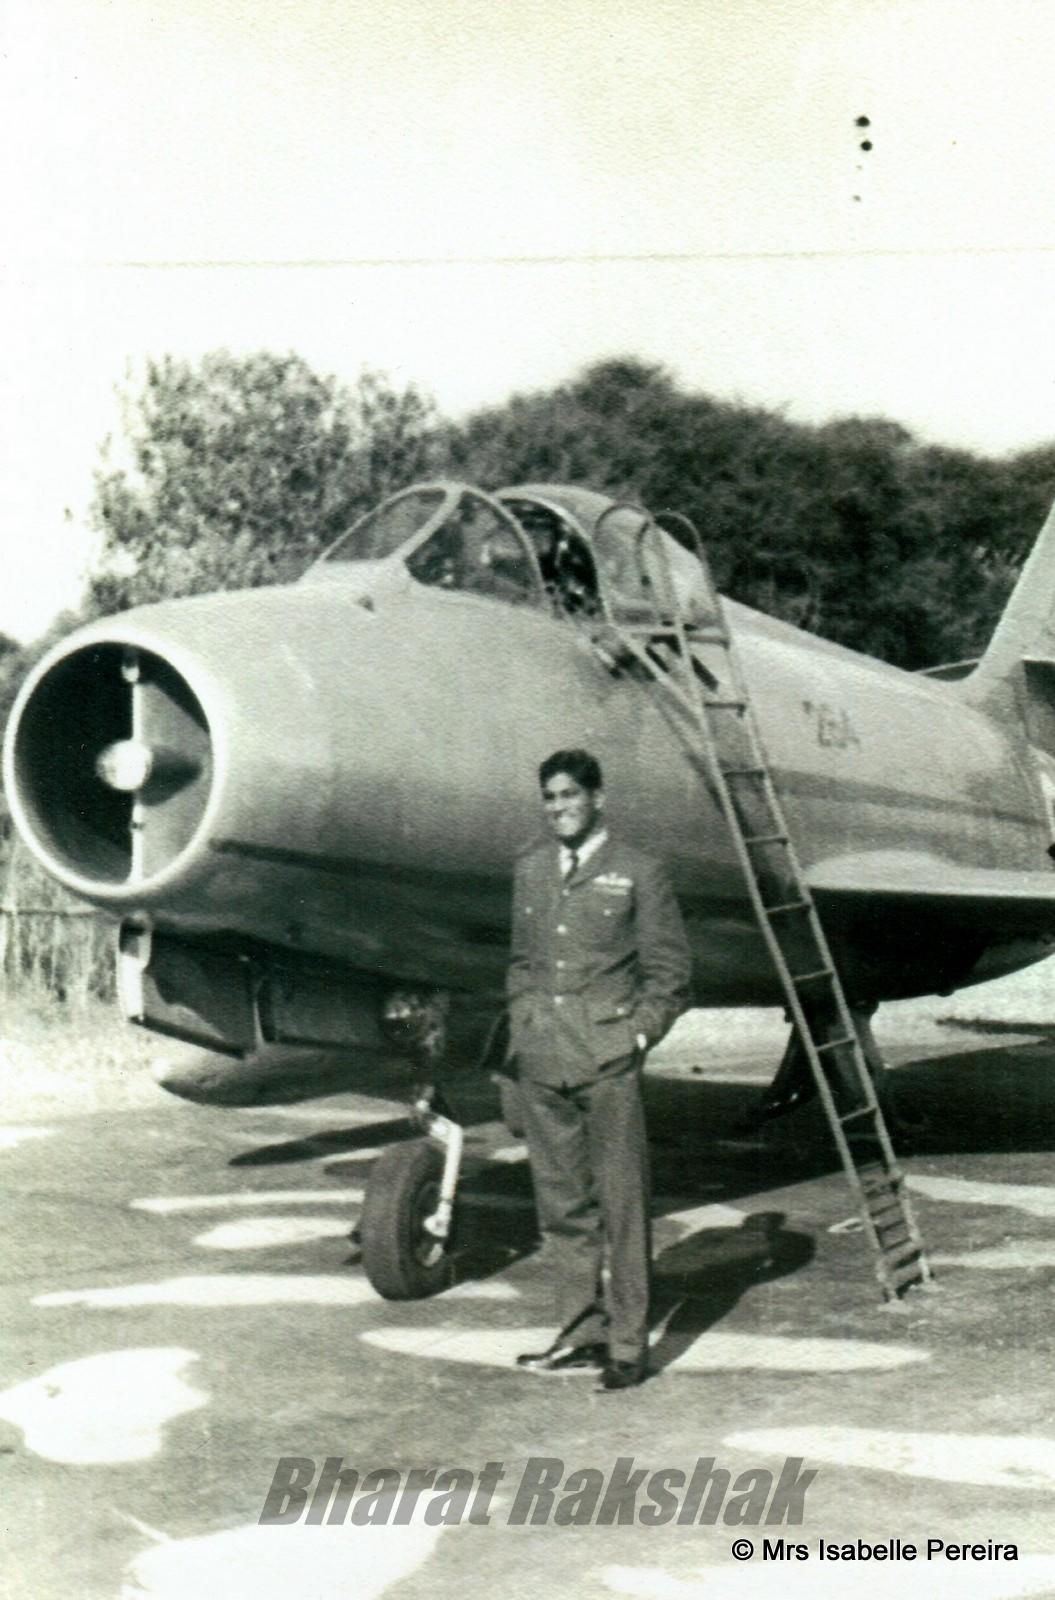 With a Mystere IVa Fighter Bomber.